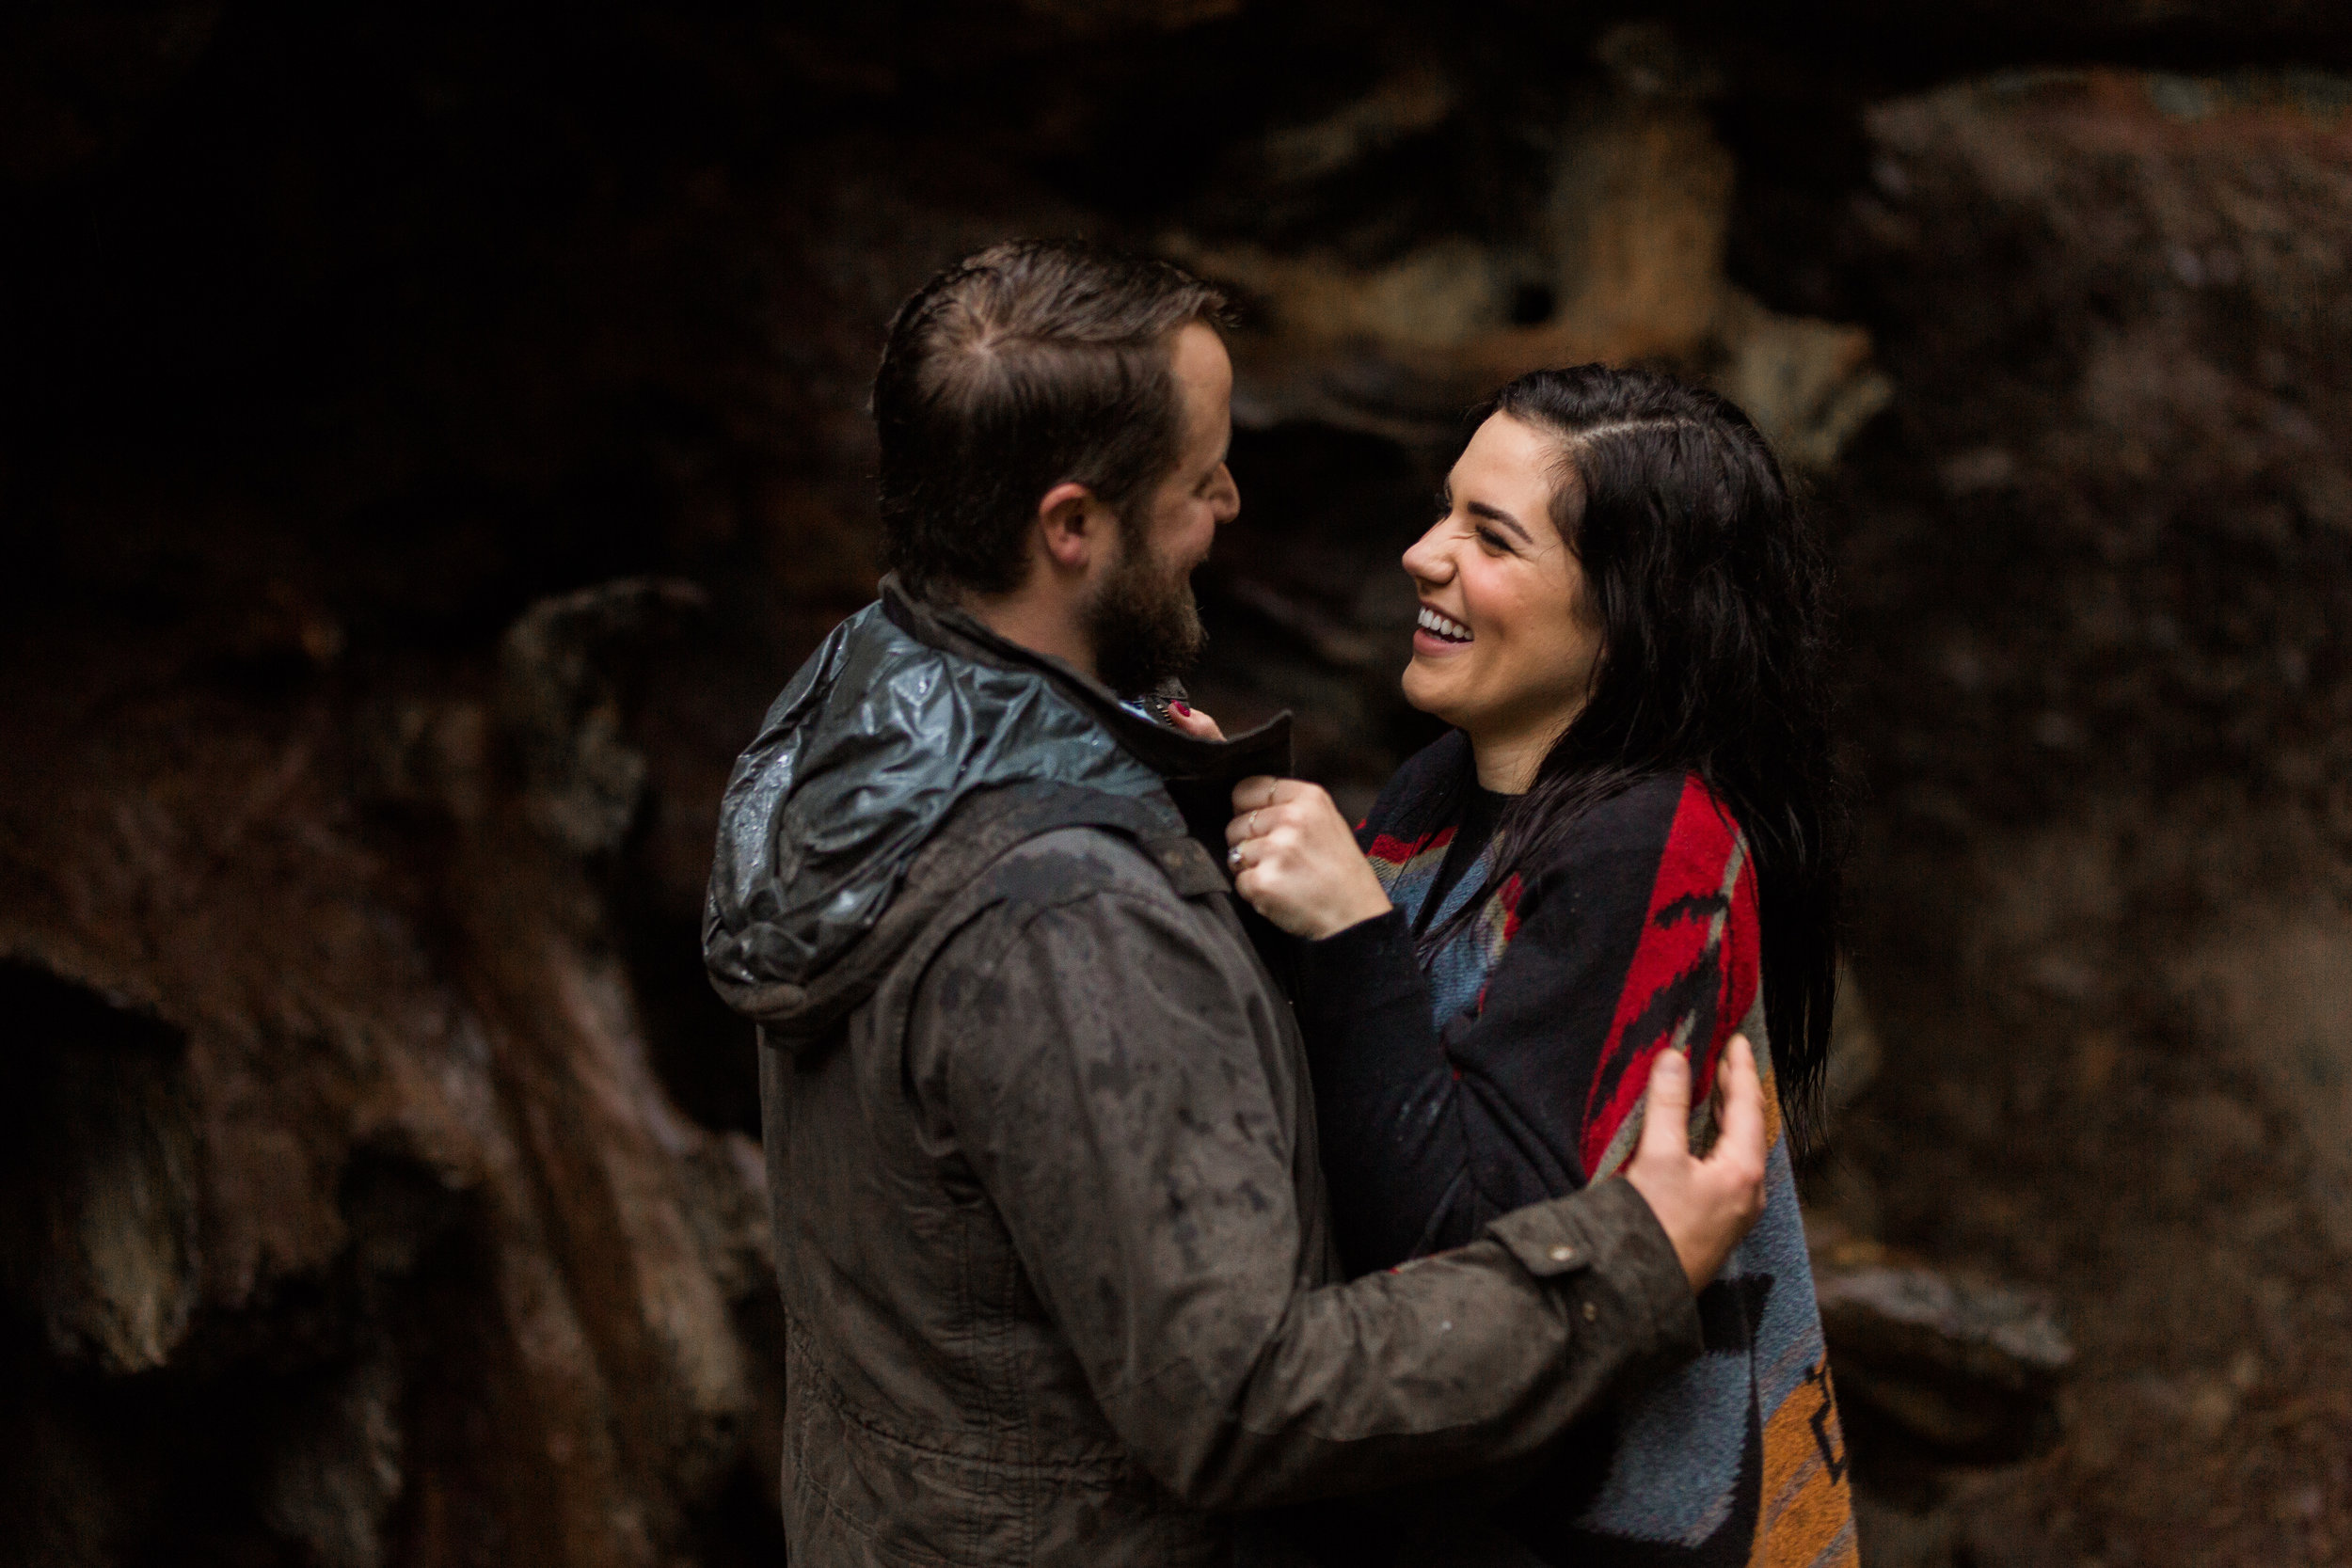 nicole-daacke-photography-redwoods-national-park-forest-rainy-foggy-adventure-engagement-session-humboldt-county-old-growth-redwood-tree-elopement-intimate-wedding-photographer-26.jpg